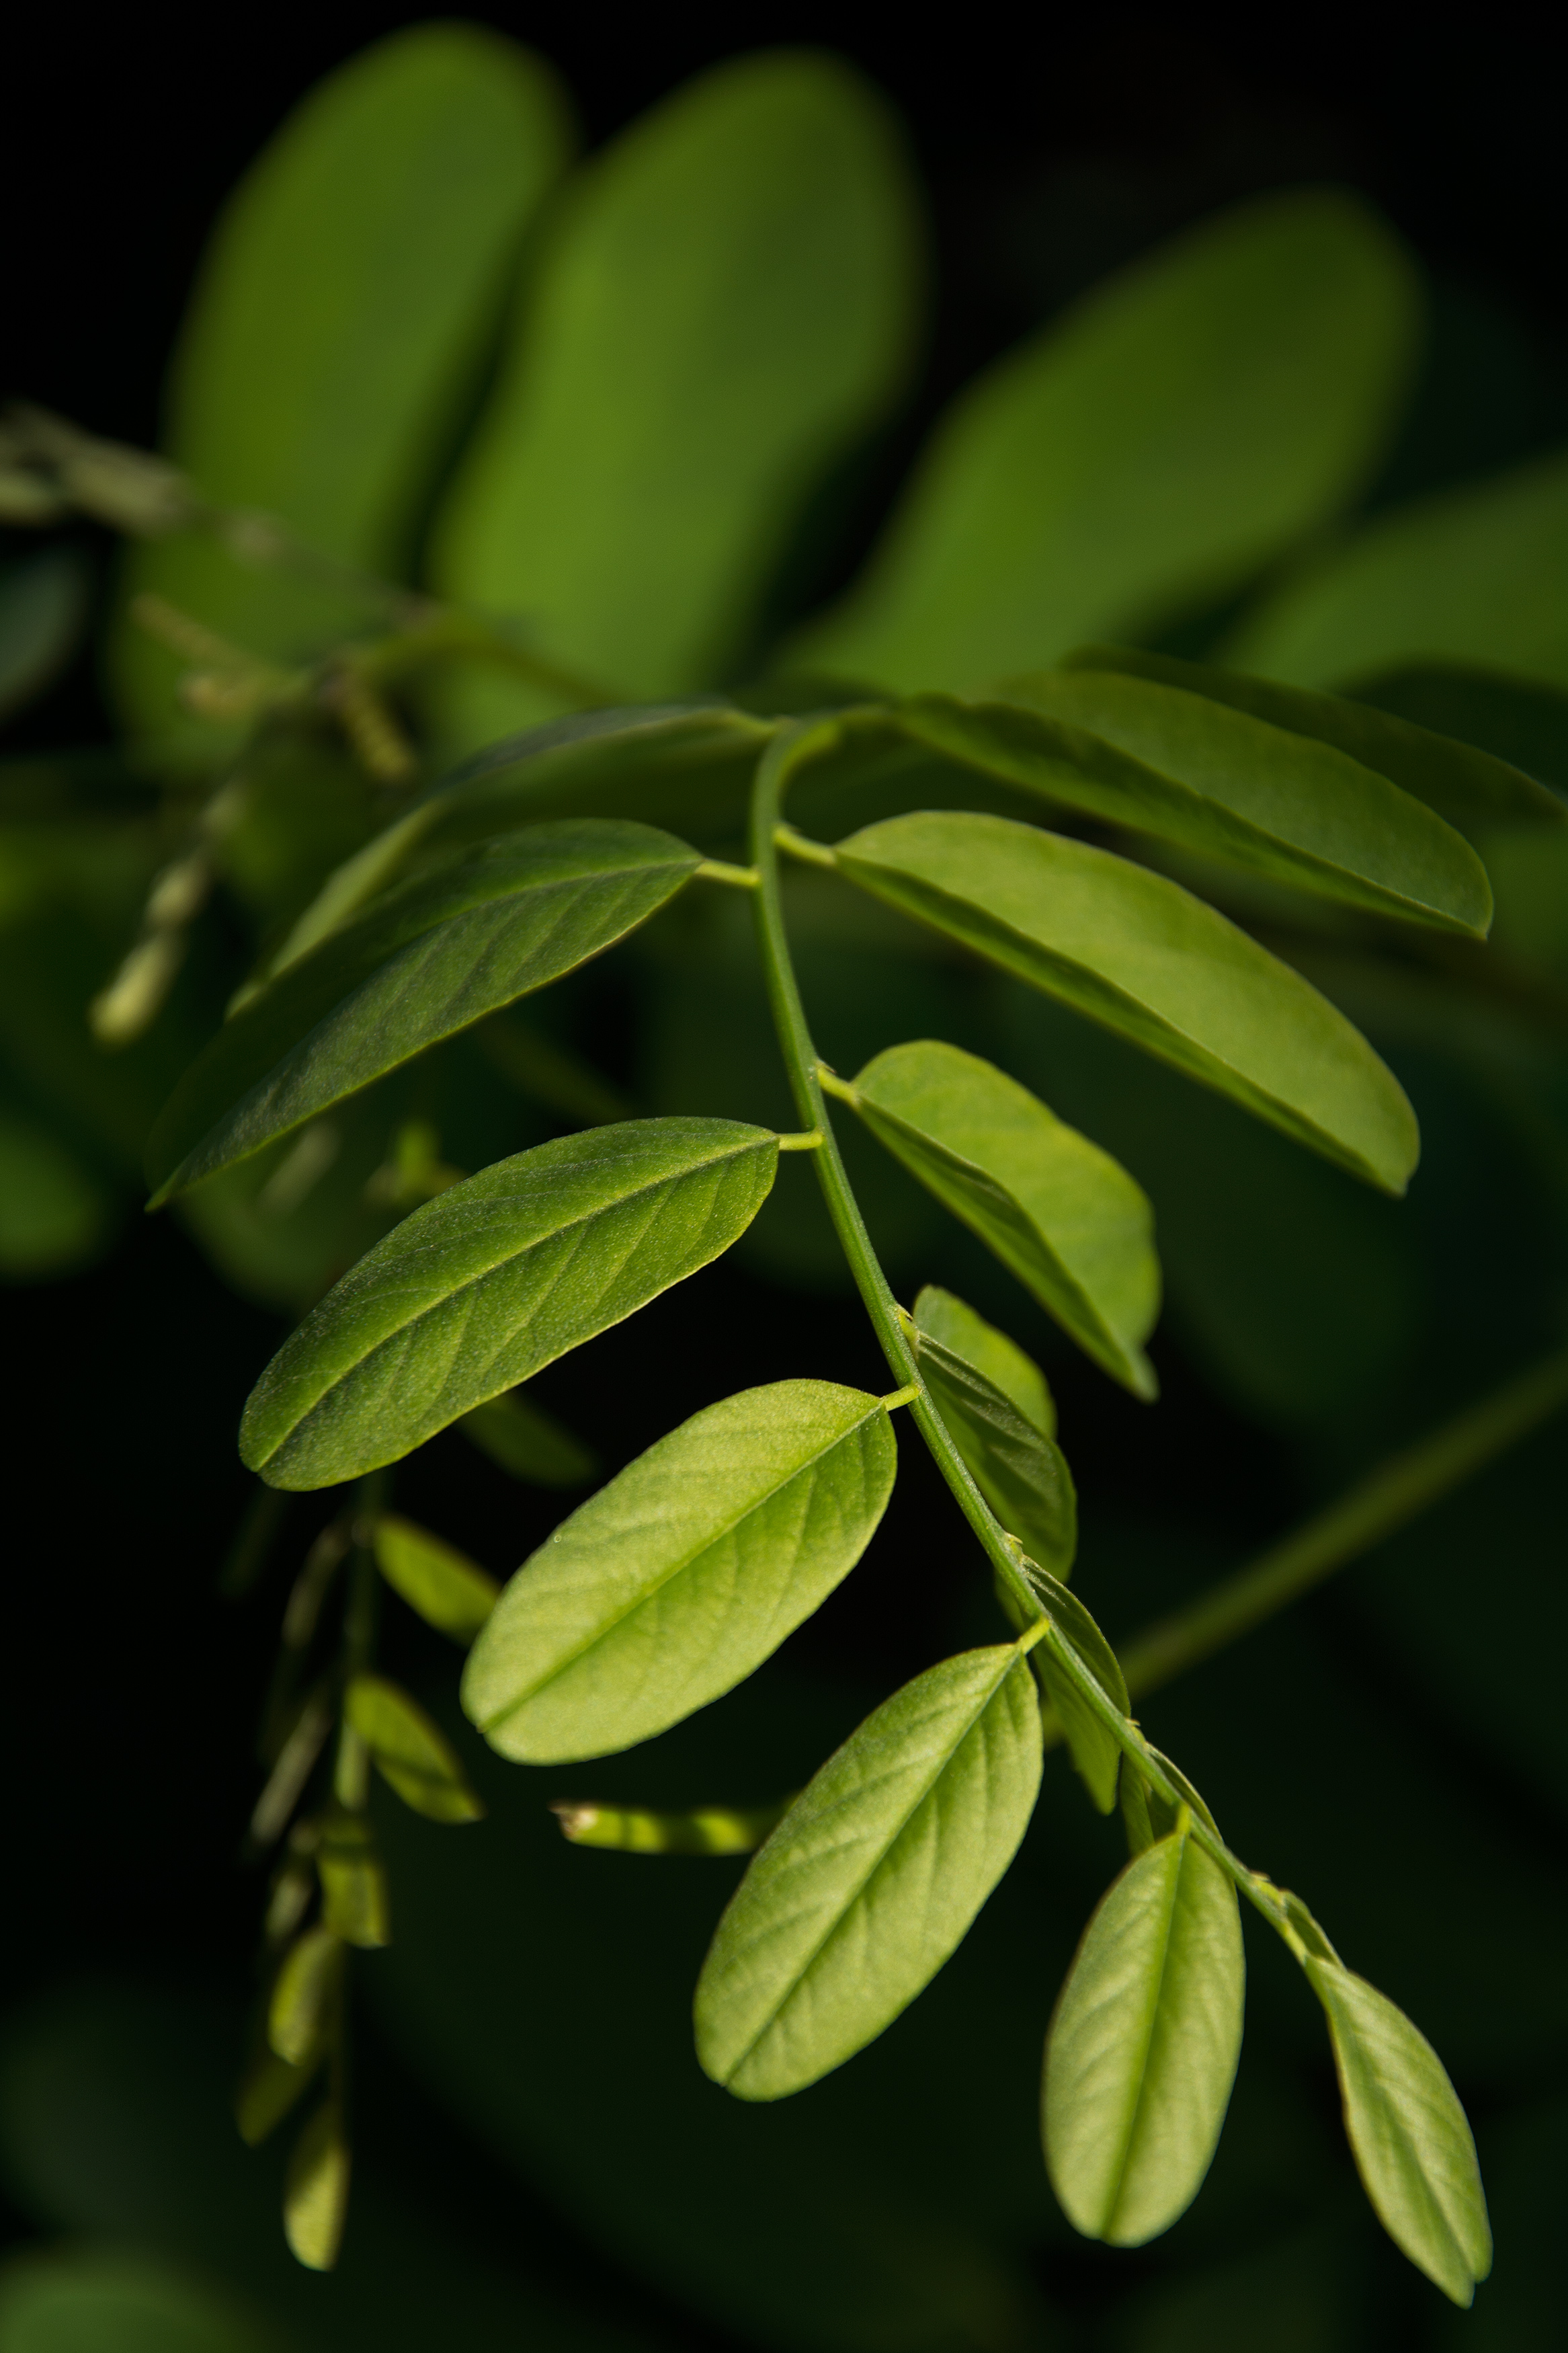 Free Image: Art of the Nature - Green leaves | Libreshot Public ...